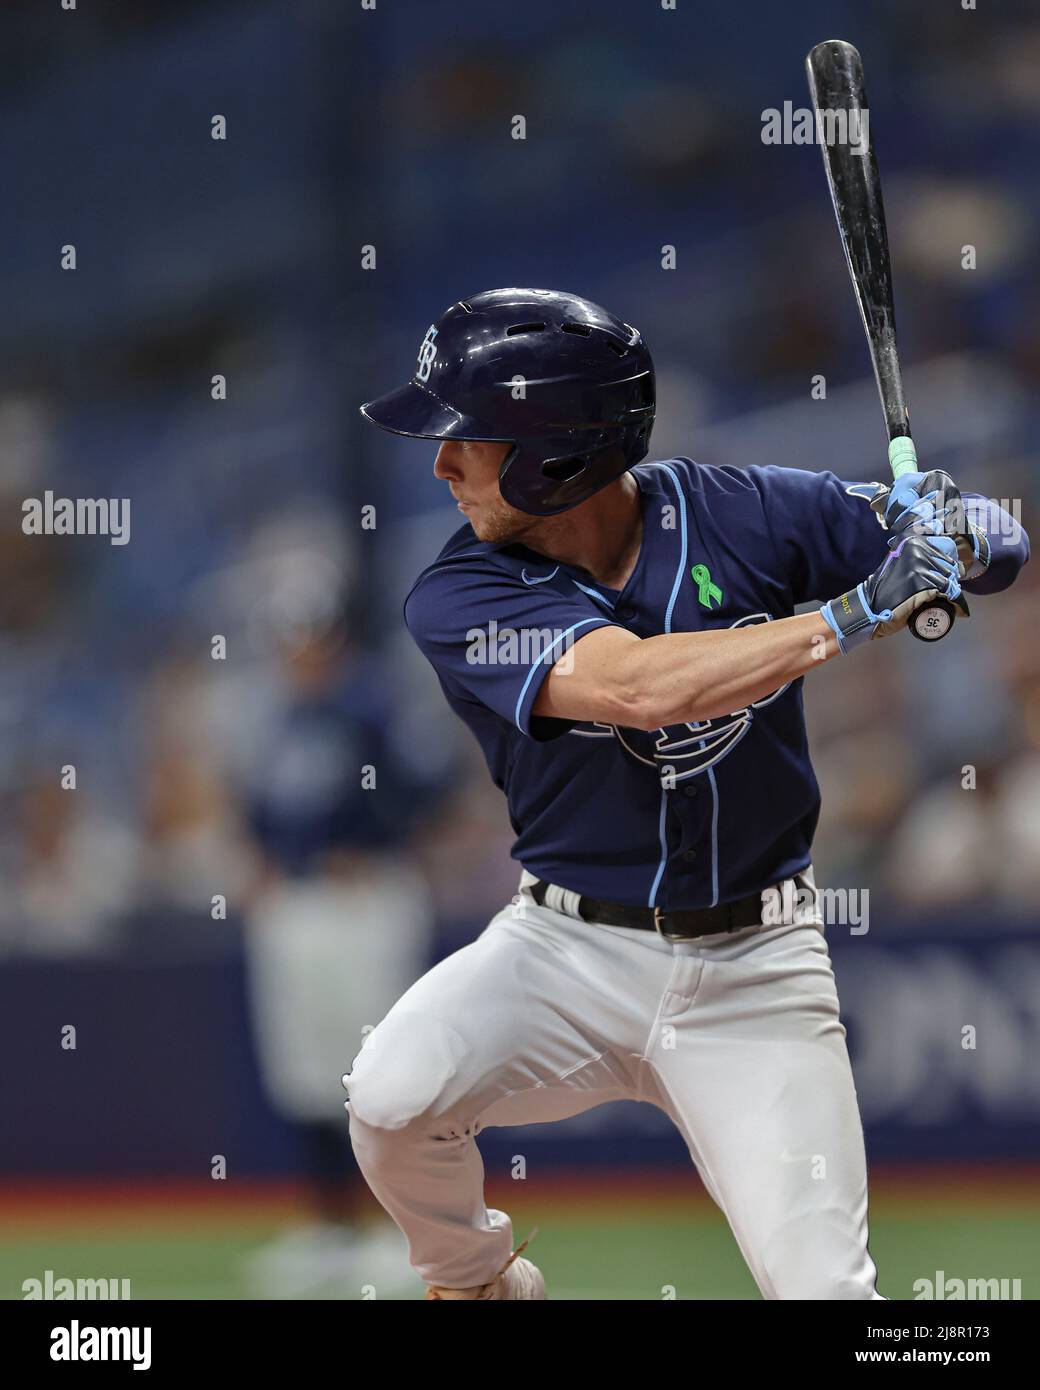 St. Petersburg, United States. 17th May, 2022. St. Petersburg, FL. USA;  Tampa Bay Rays right fielder Brett Phillips (35) prepares to hit during a  major league baseball game against the Detroit Tigers